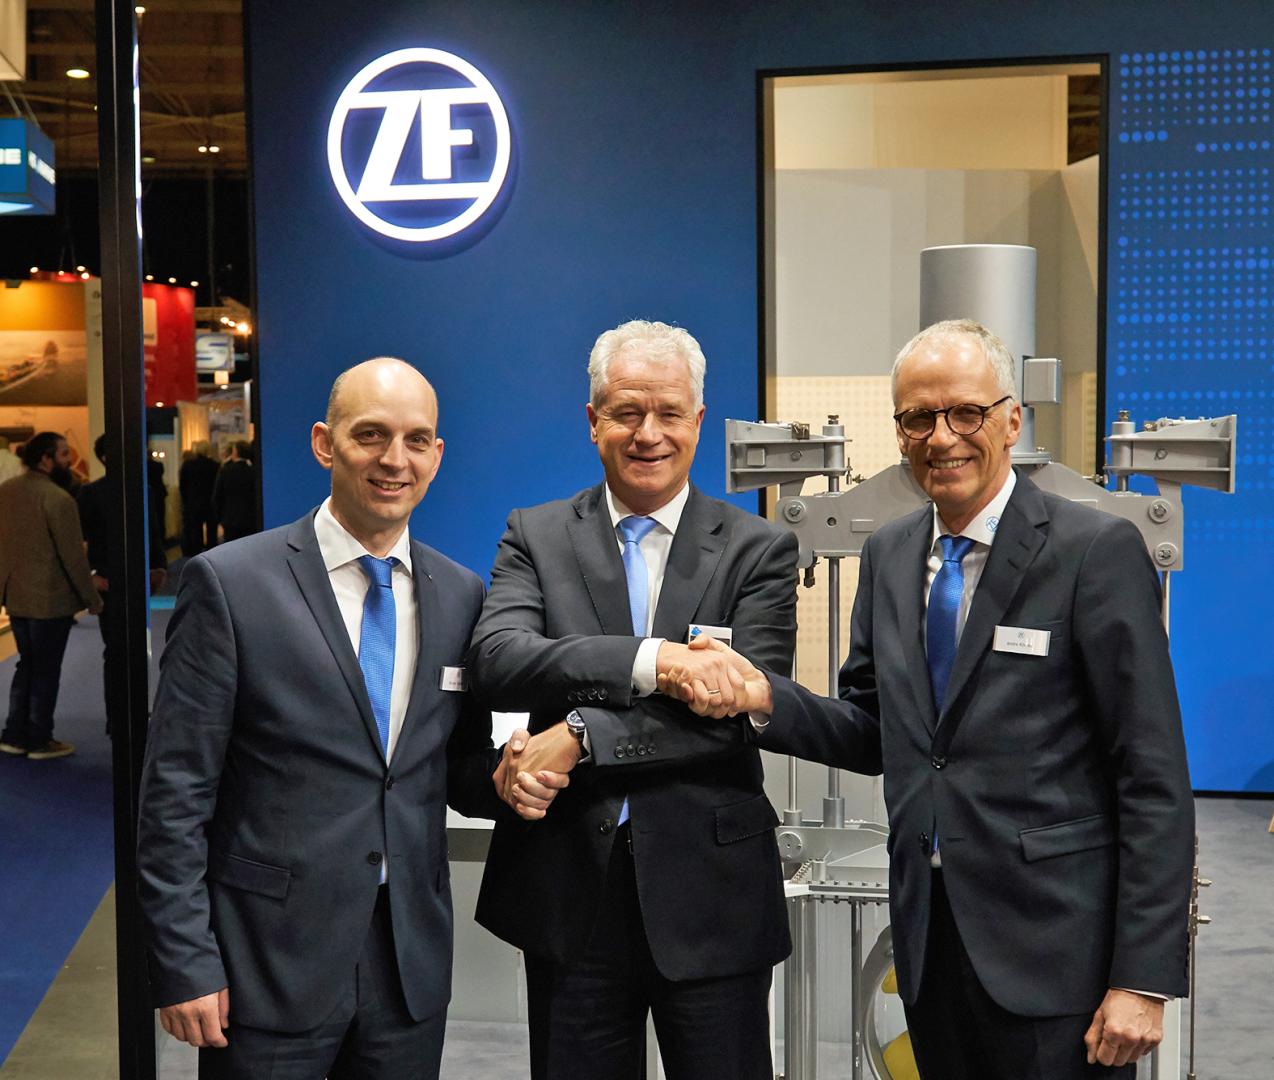 Successful expansion of a long-term partnership: ZF and ADS van STIGT broaden their business relationship to include the rudder propeller and tunnel thruster segment. From left to right: Reiner Viebahn (ZF), Dave Plug (ADS van STIGT), Andre Körner (ZF)